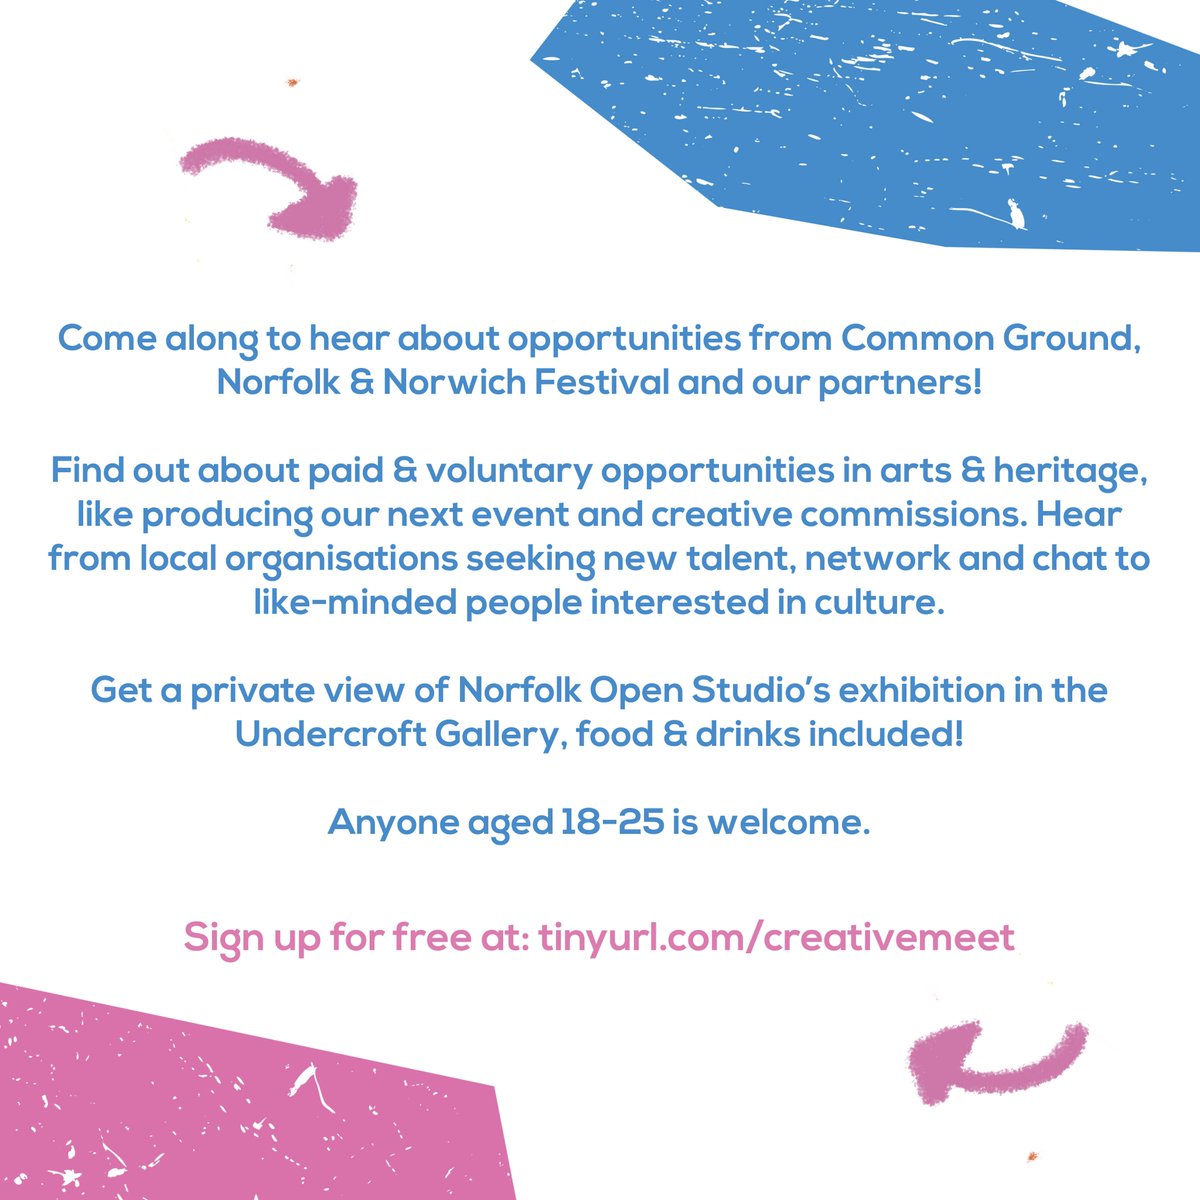 On Mon 19th Sept we're having a meet up in #Norwich  to share arts & heritage opportunities for 18-25 year olds - from Common Ground & our partners! 🙌

+ An exhibition private view! 🥂

Sign up for free here: eventbrite.co.uk/e/common-groun…

#ArtsOpportunity #NorfolkArt